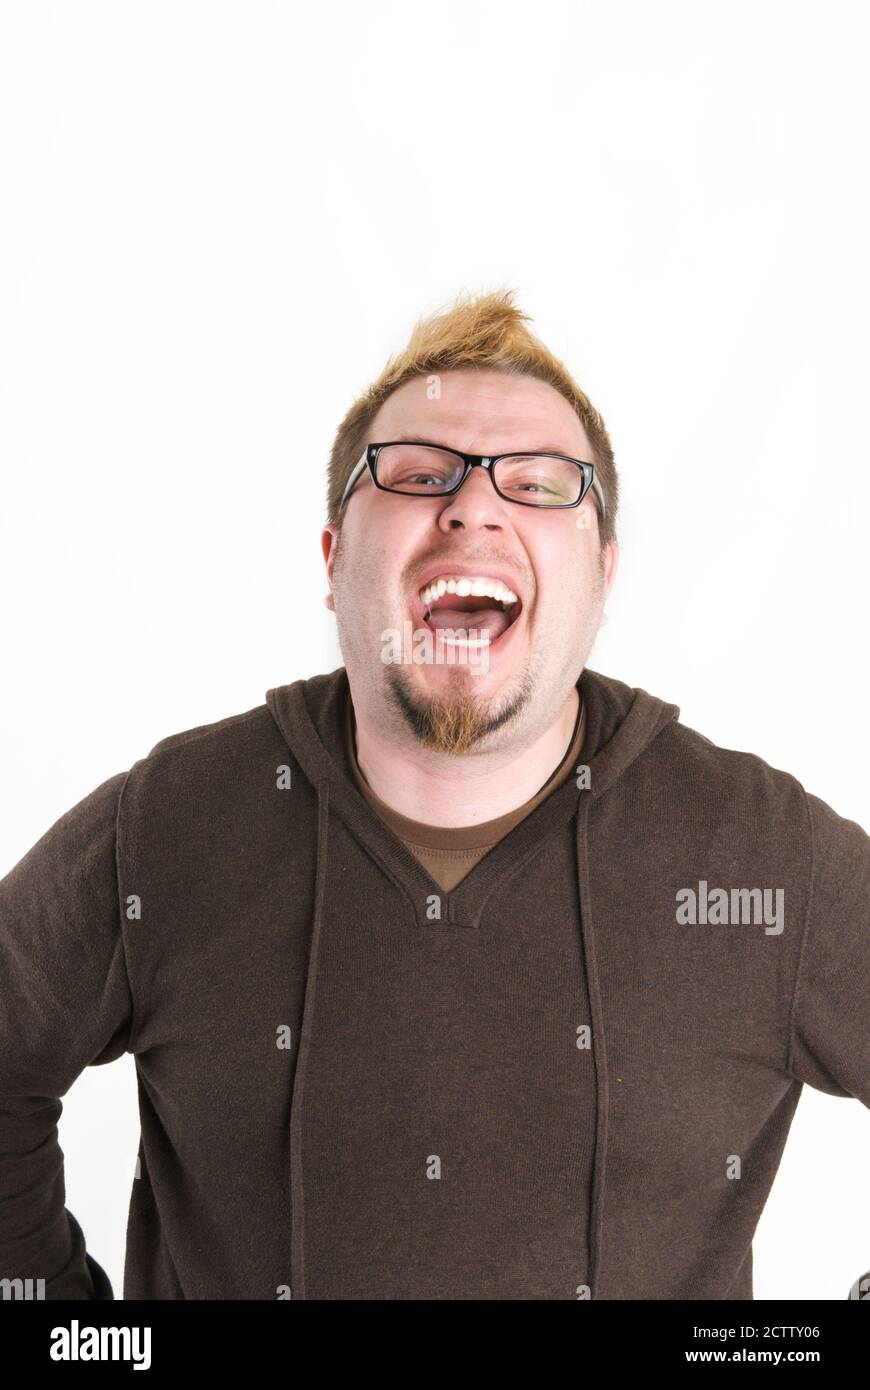 Laughing Man with Glasses and Brown Sweatshirt Stock Photo